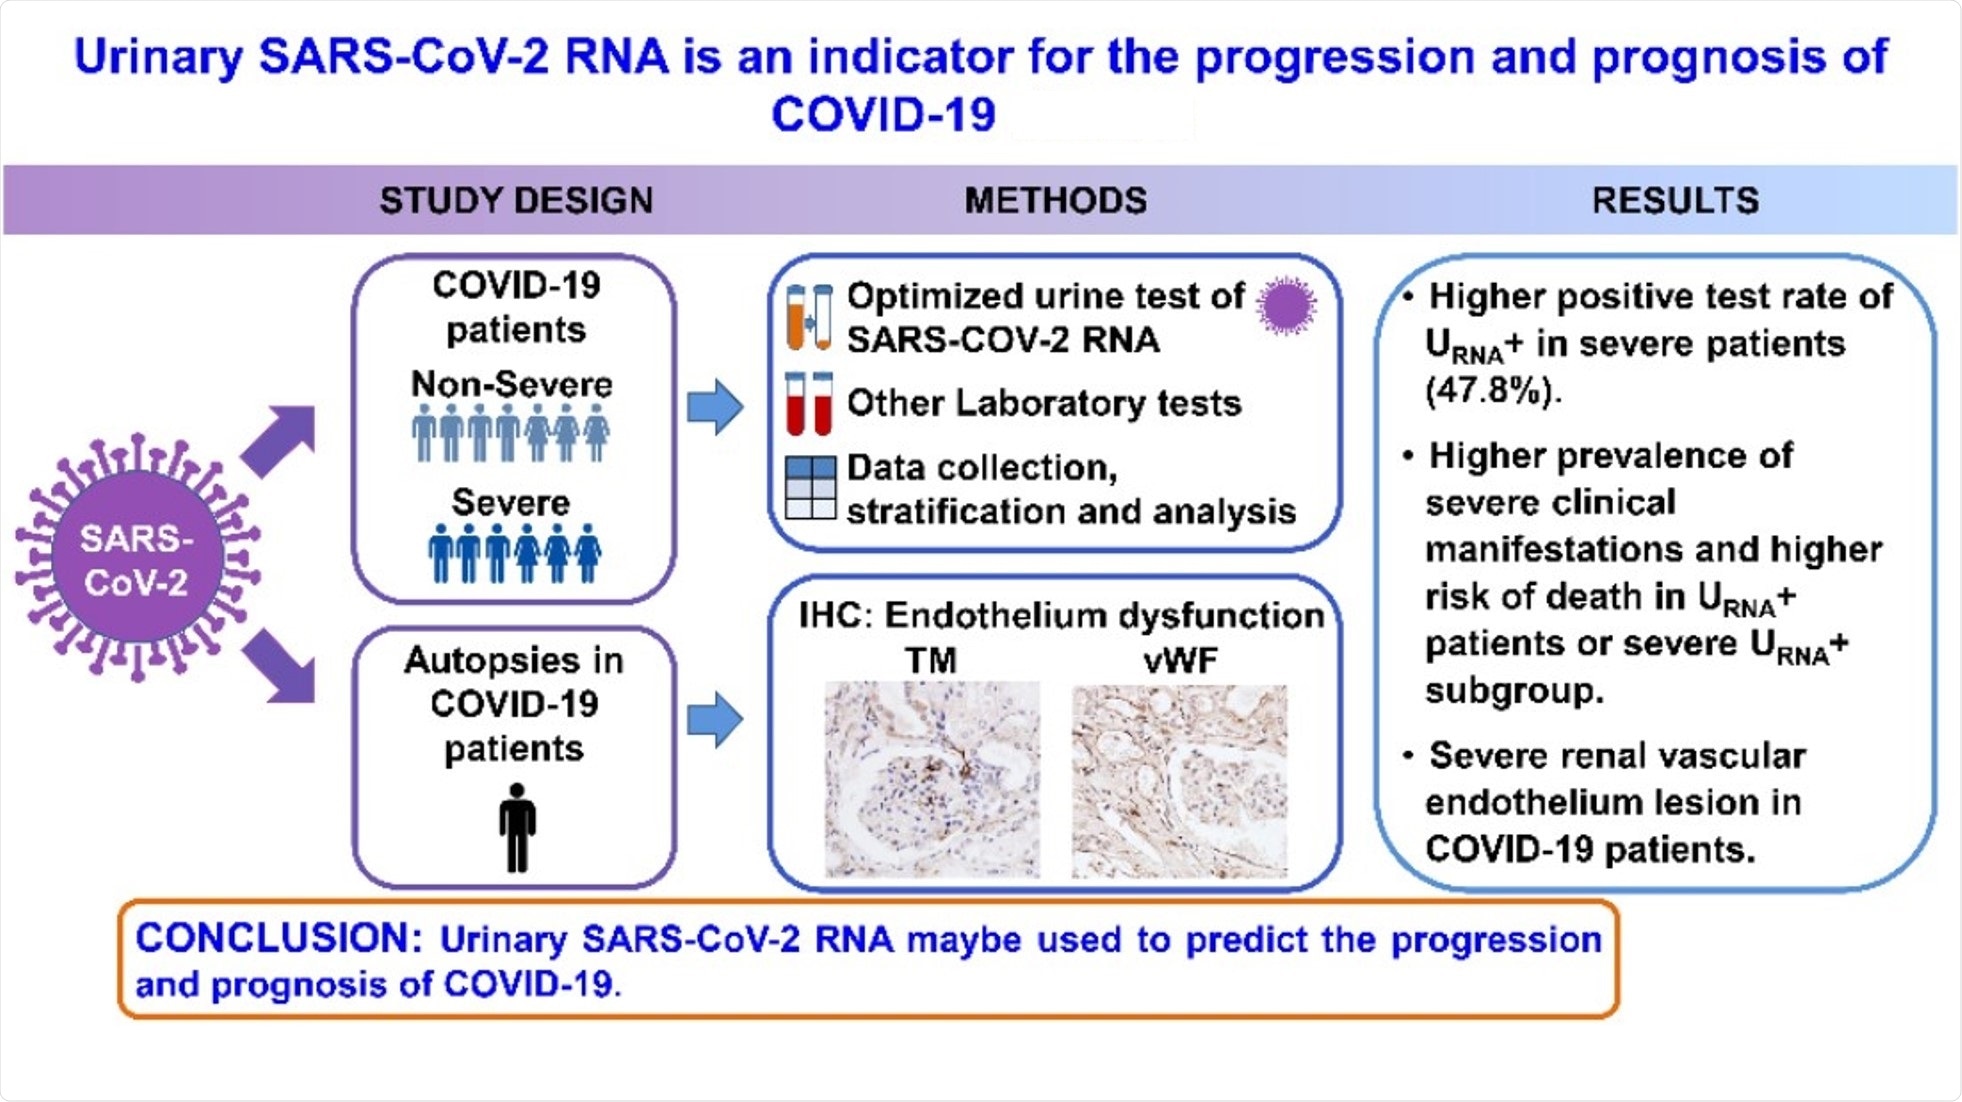 Urinary SARS-CoV-2 RNA Is an Indicator for the Progression and Prognosis of COVID-19